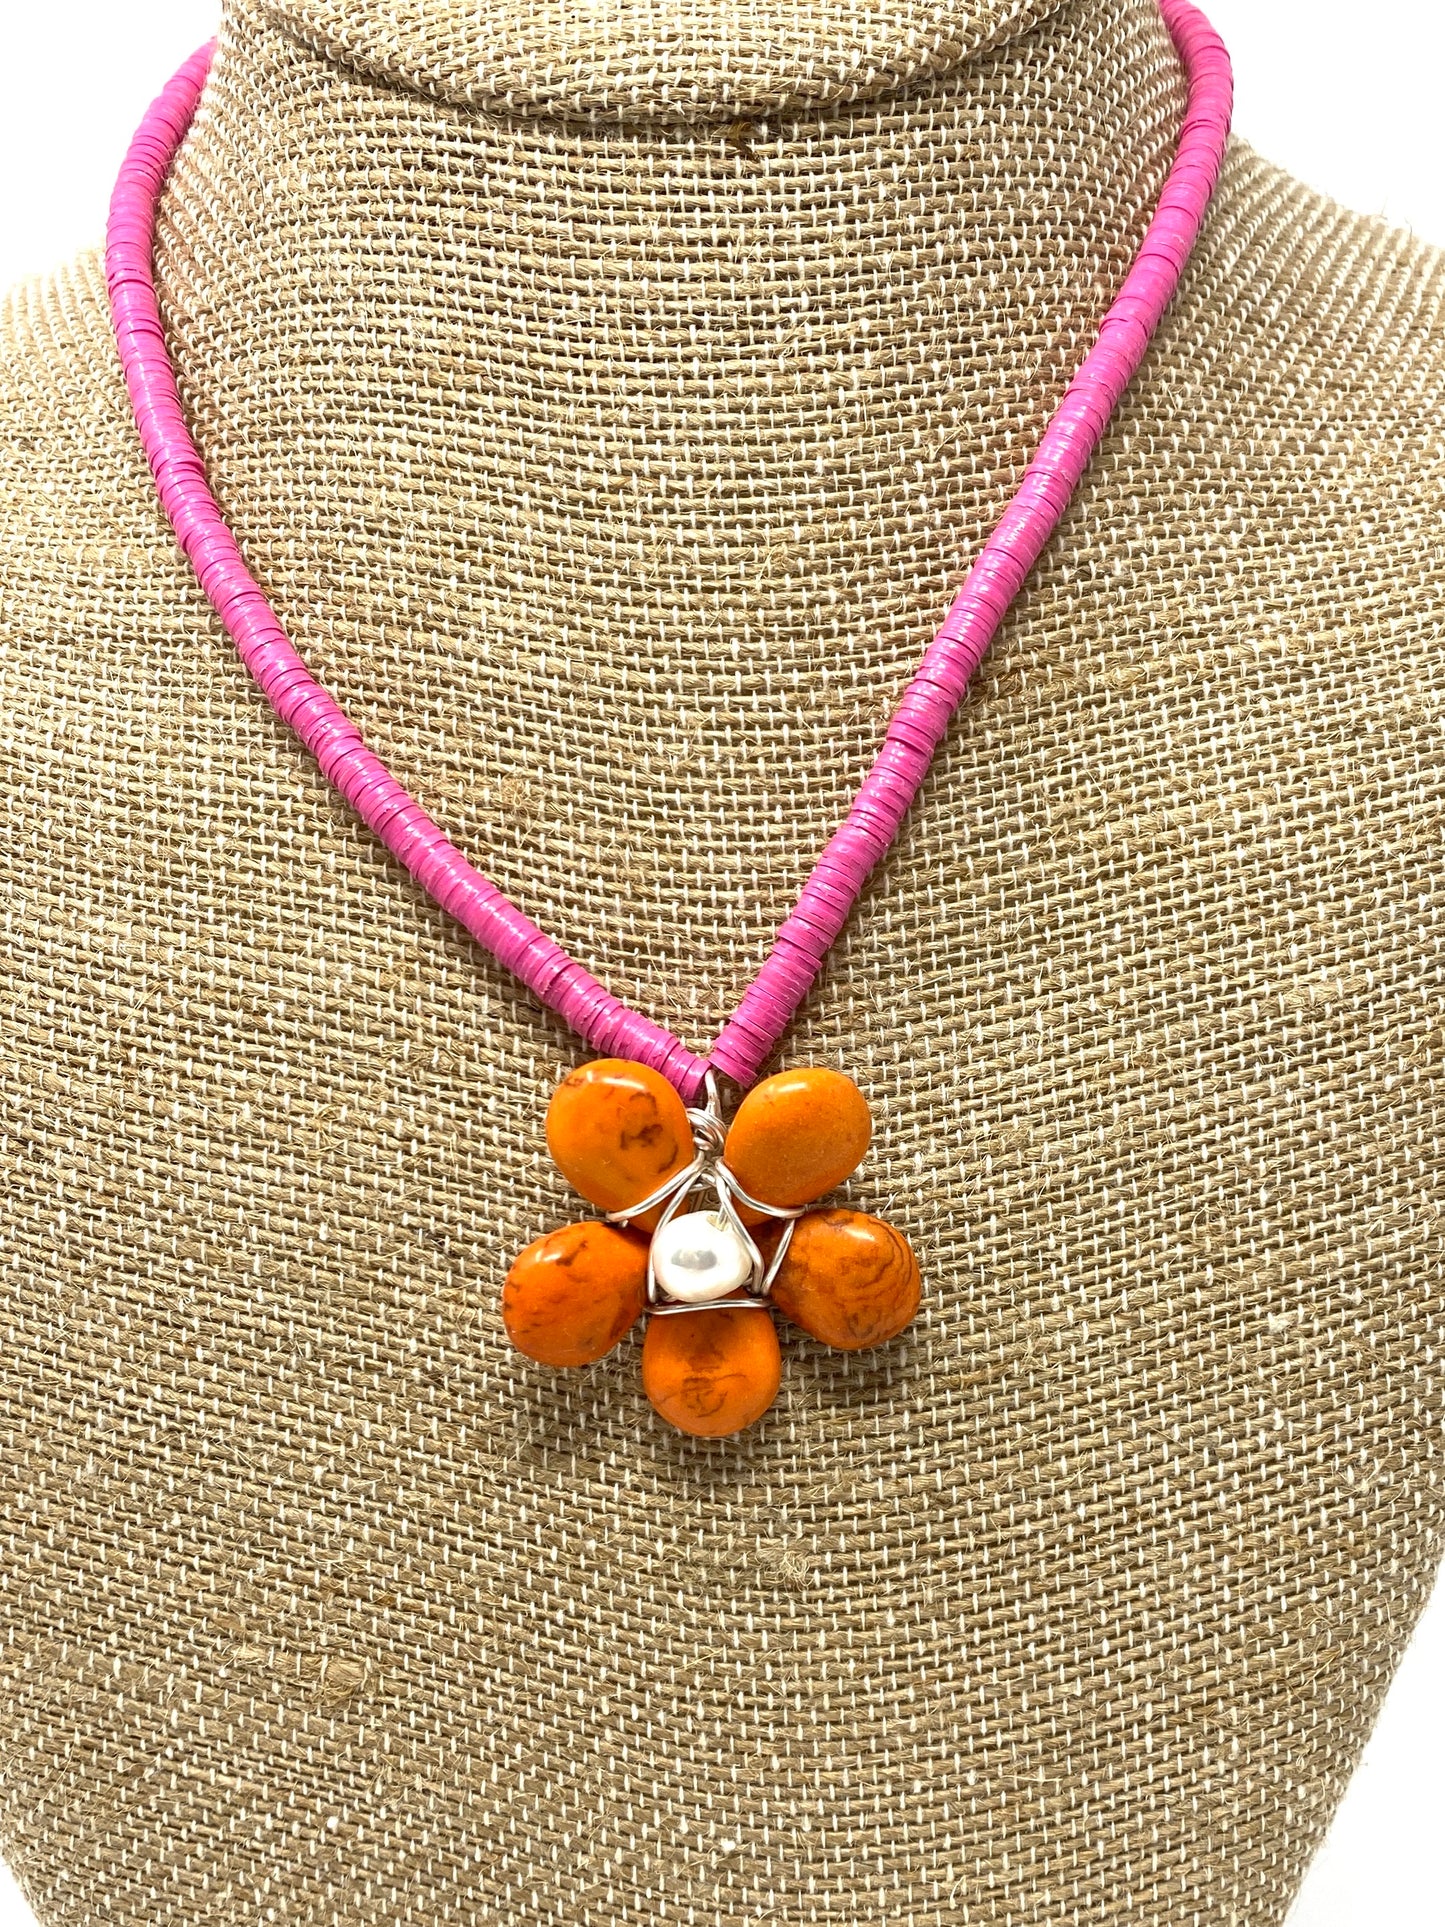 Bright Pink Vinyl Necklace With Orange and Pearl Flower Pendant